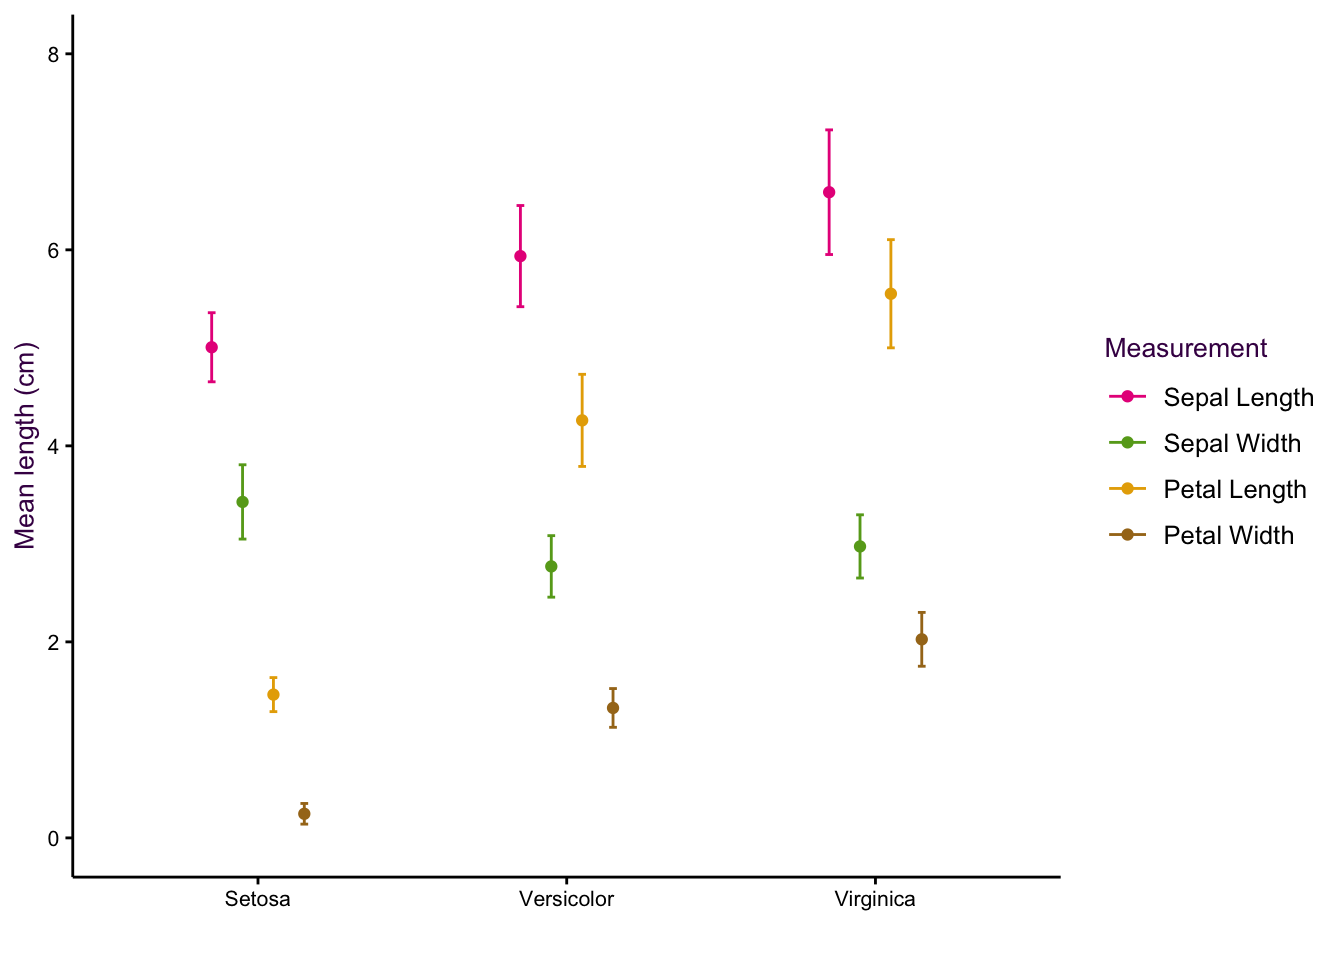 Dot plots of the iris data set. _Left_: All data points visible, sorting by measurement (top) or species (bottom). _Right_: Mean and standard deviations of each sub-group only.